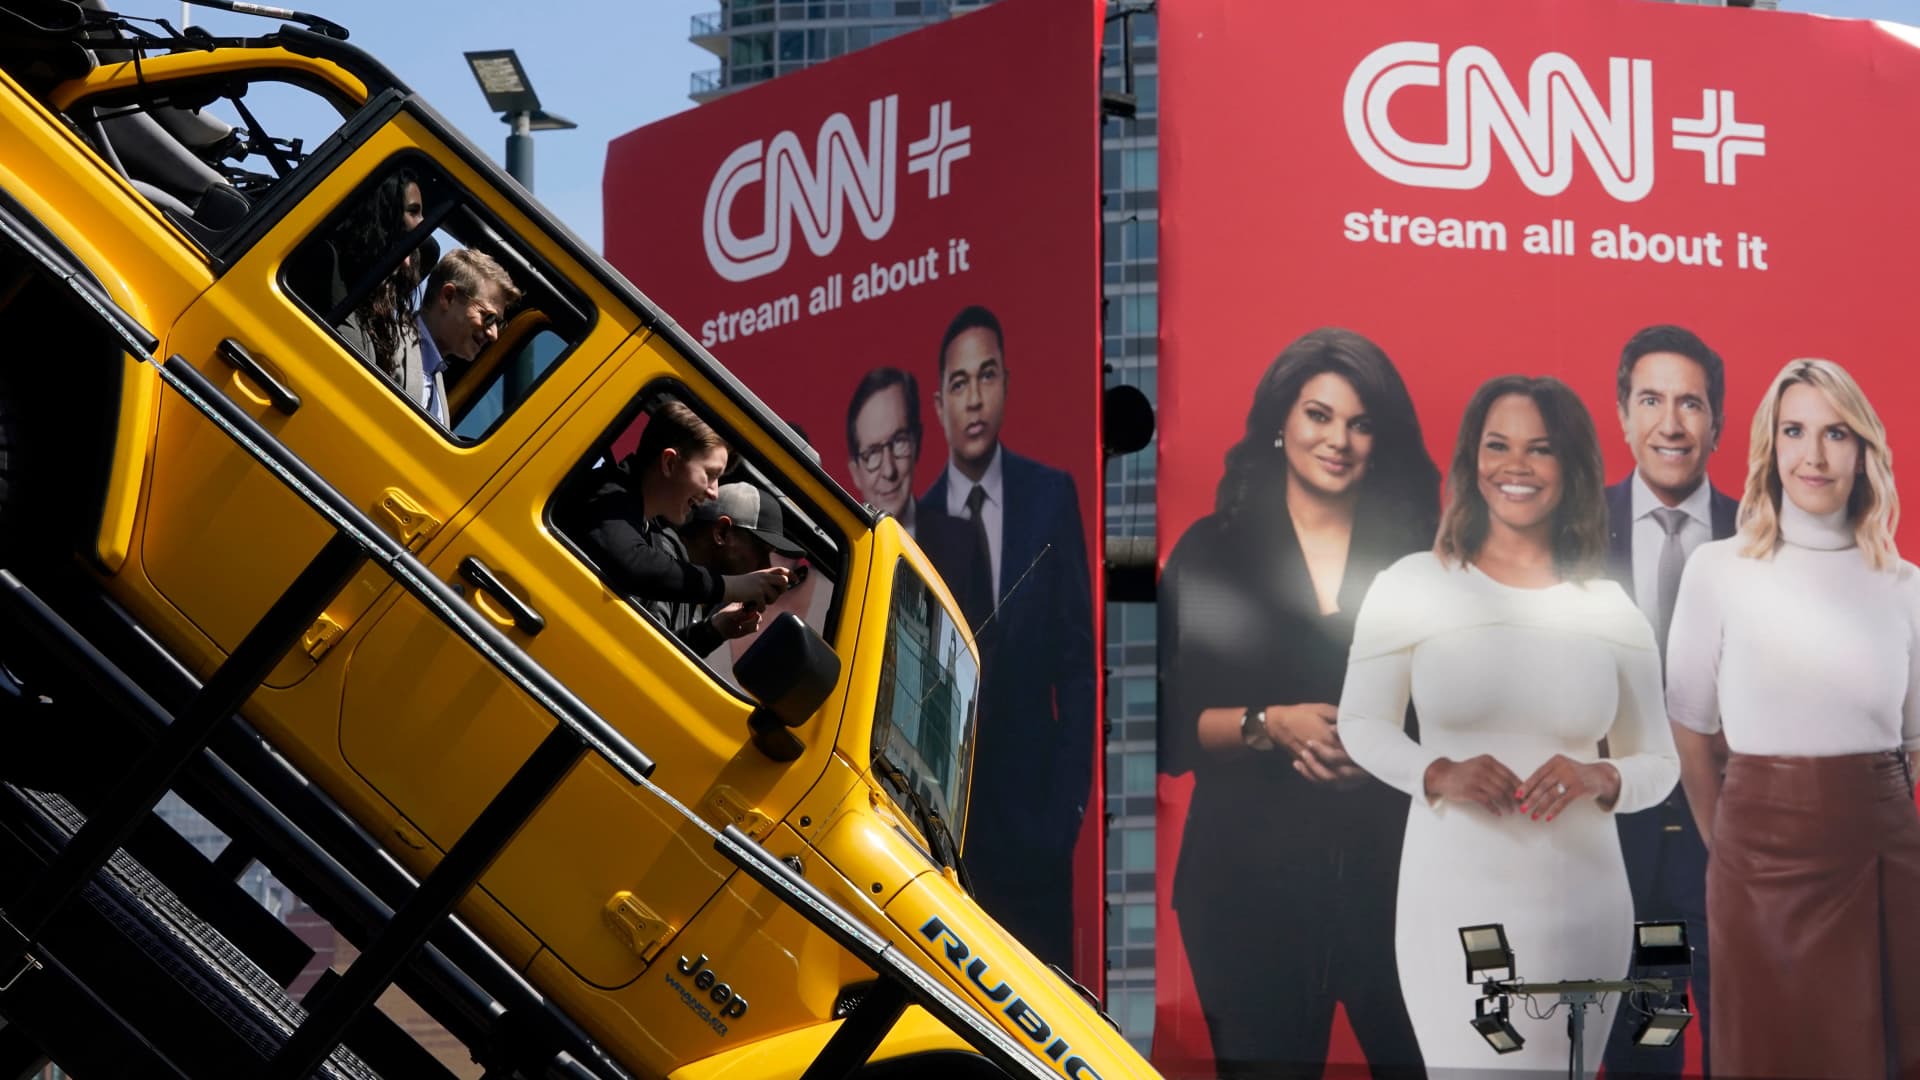 CNN+ will shut down April 30, just one month after launch